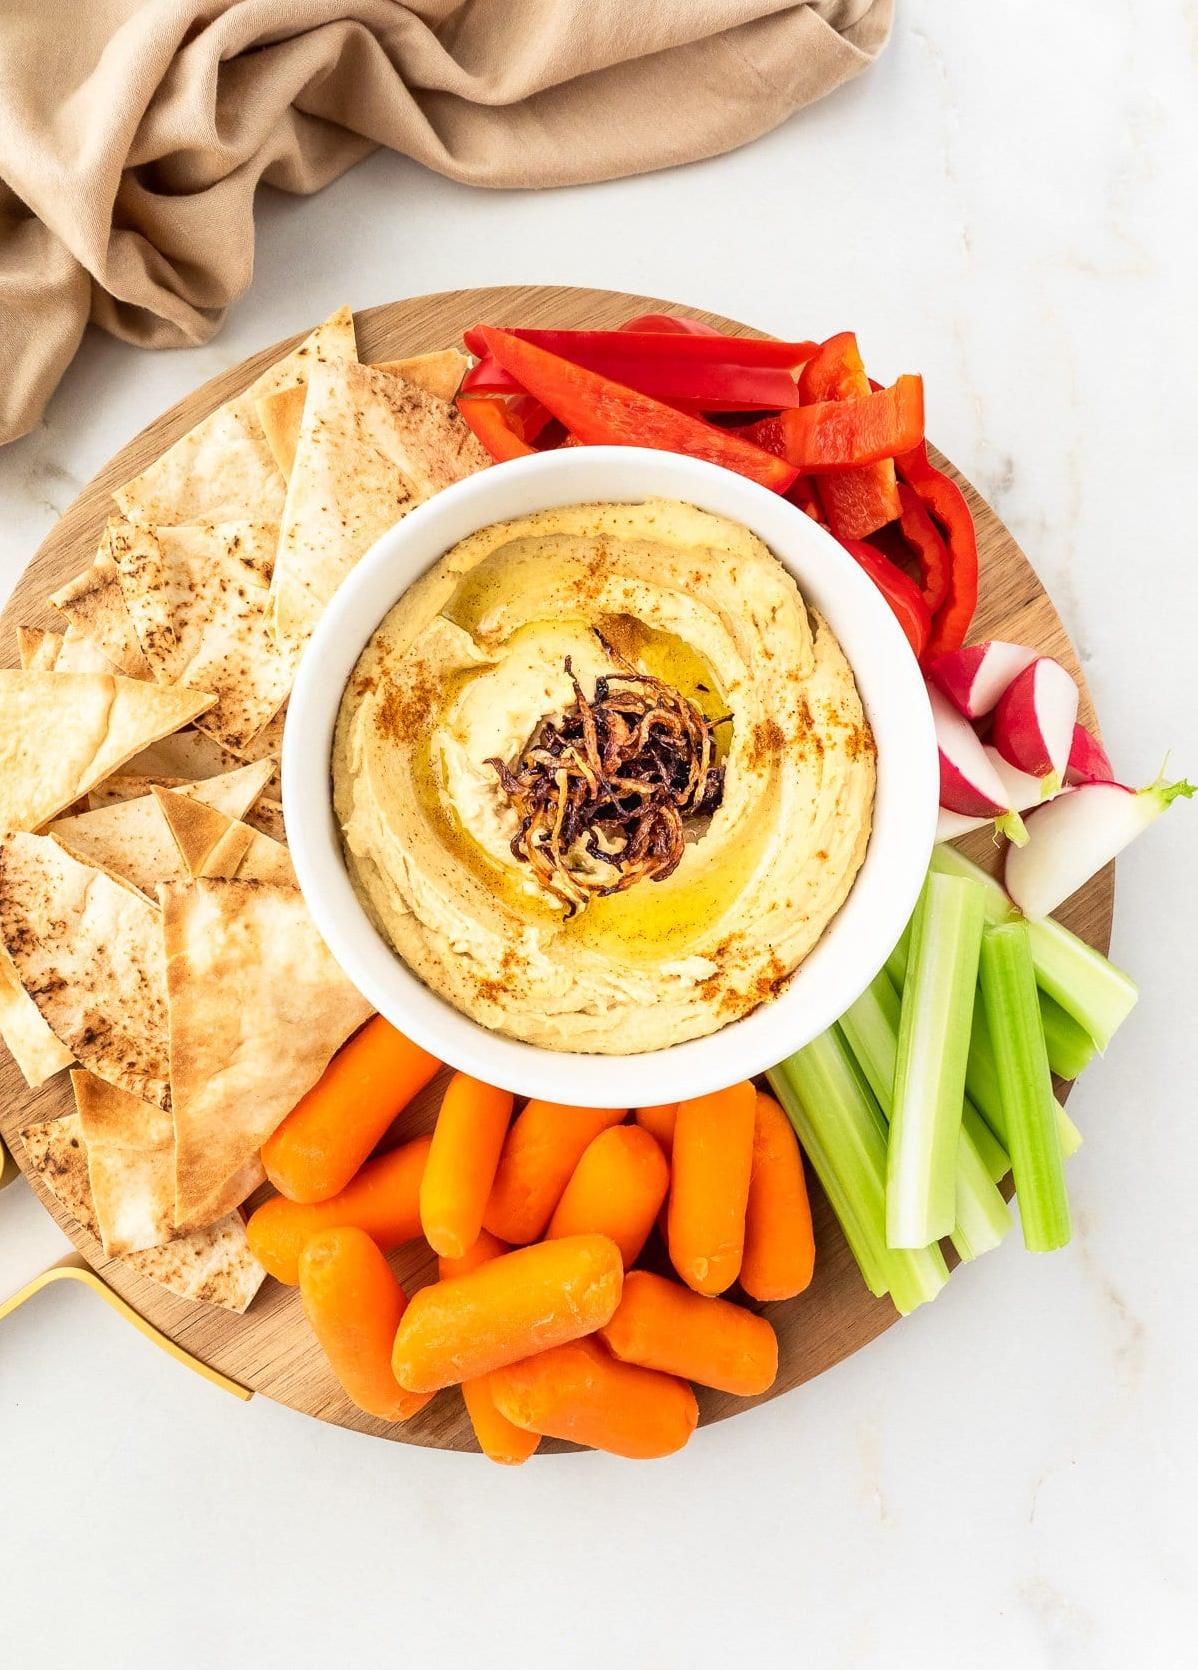  This flavourful dip comes together in just a few easy steps